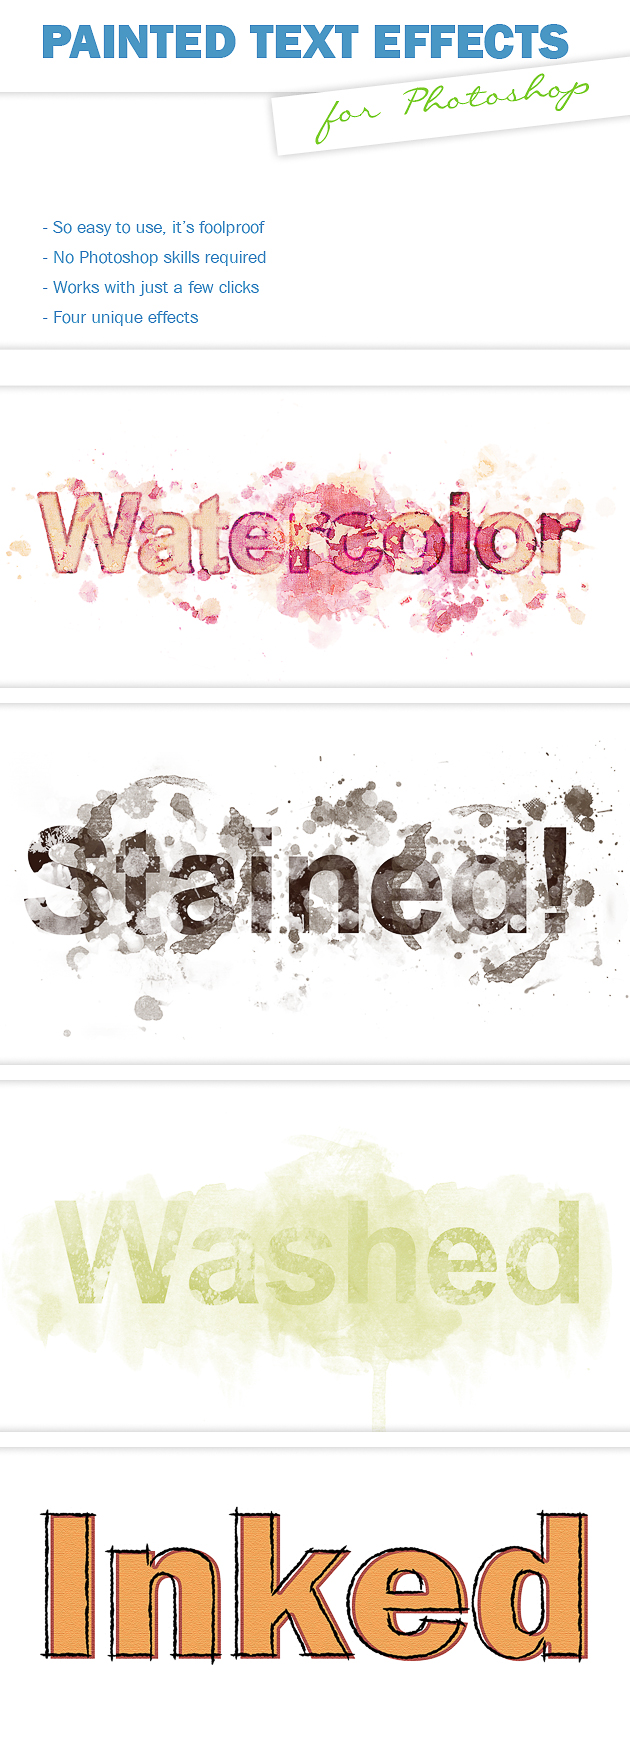 Painted Text Effect Photoshop Actions 2